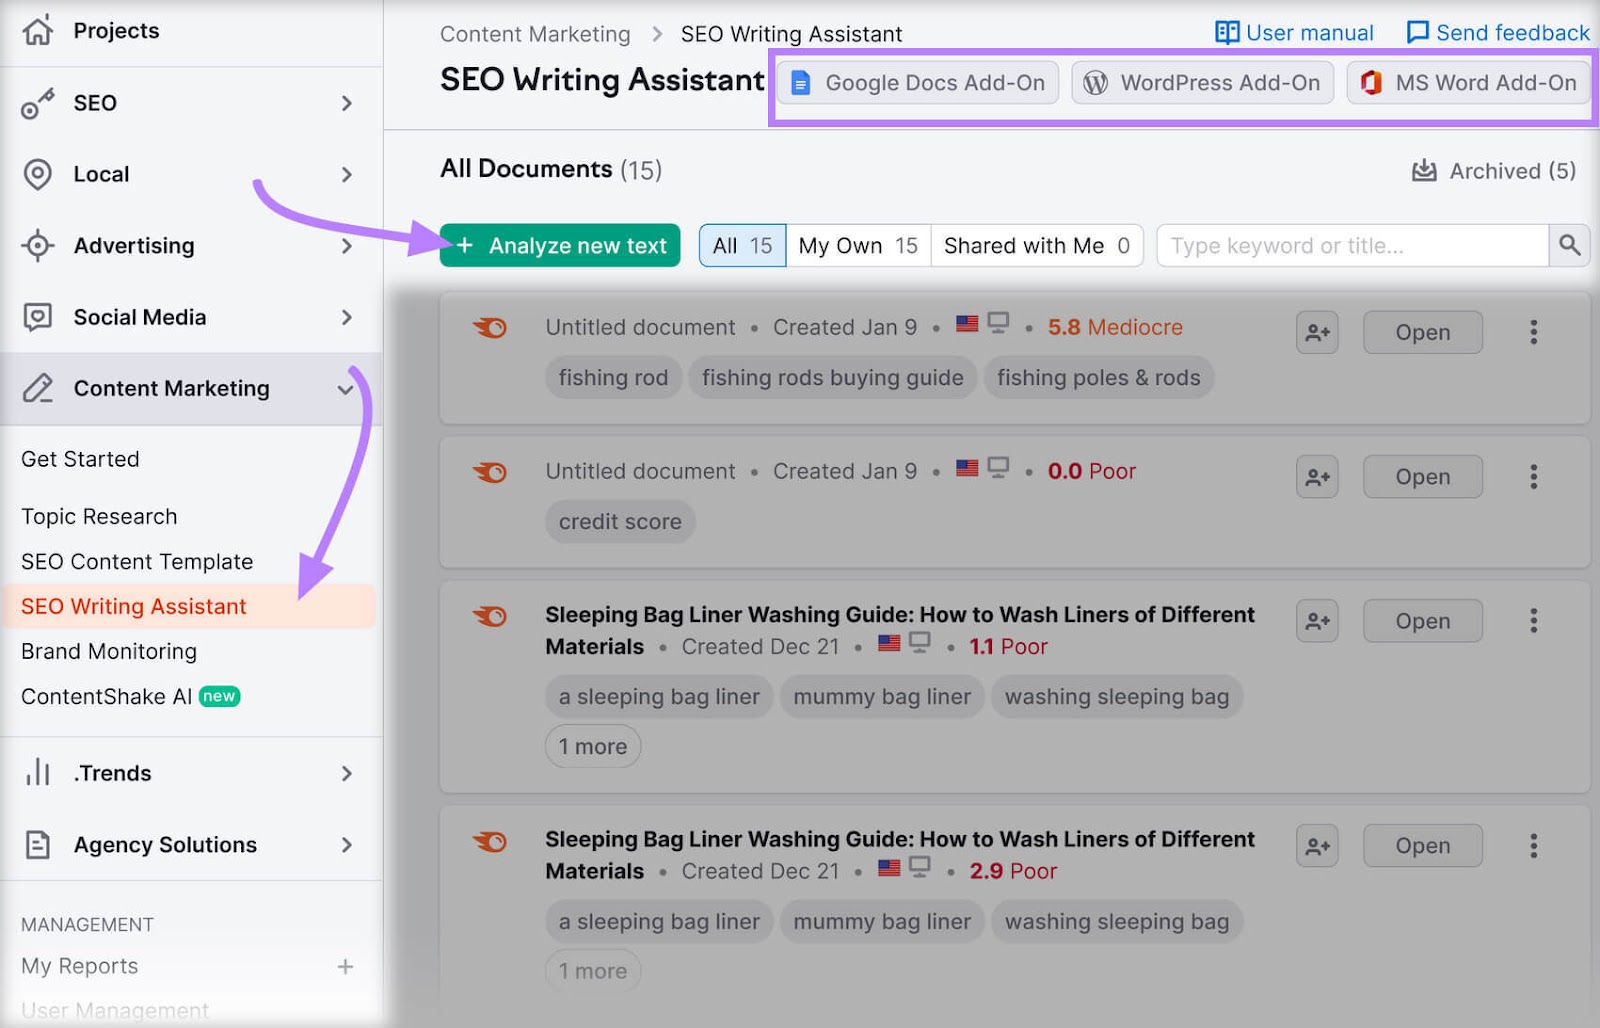 "Analyze new text" button in SEO Writing Assistant